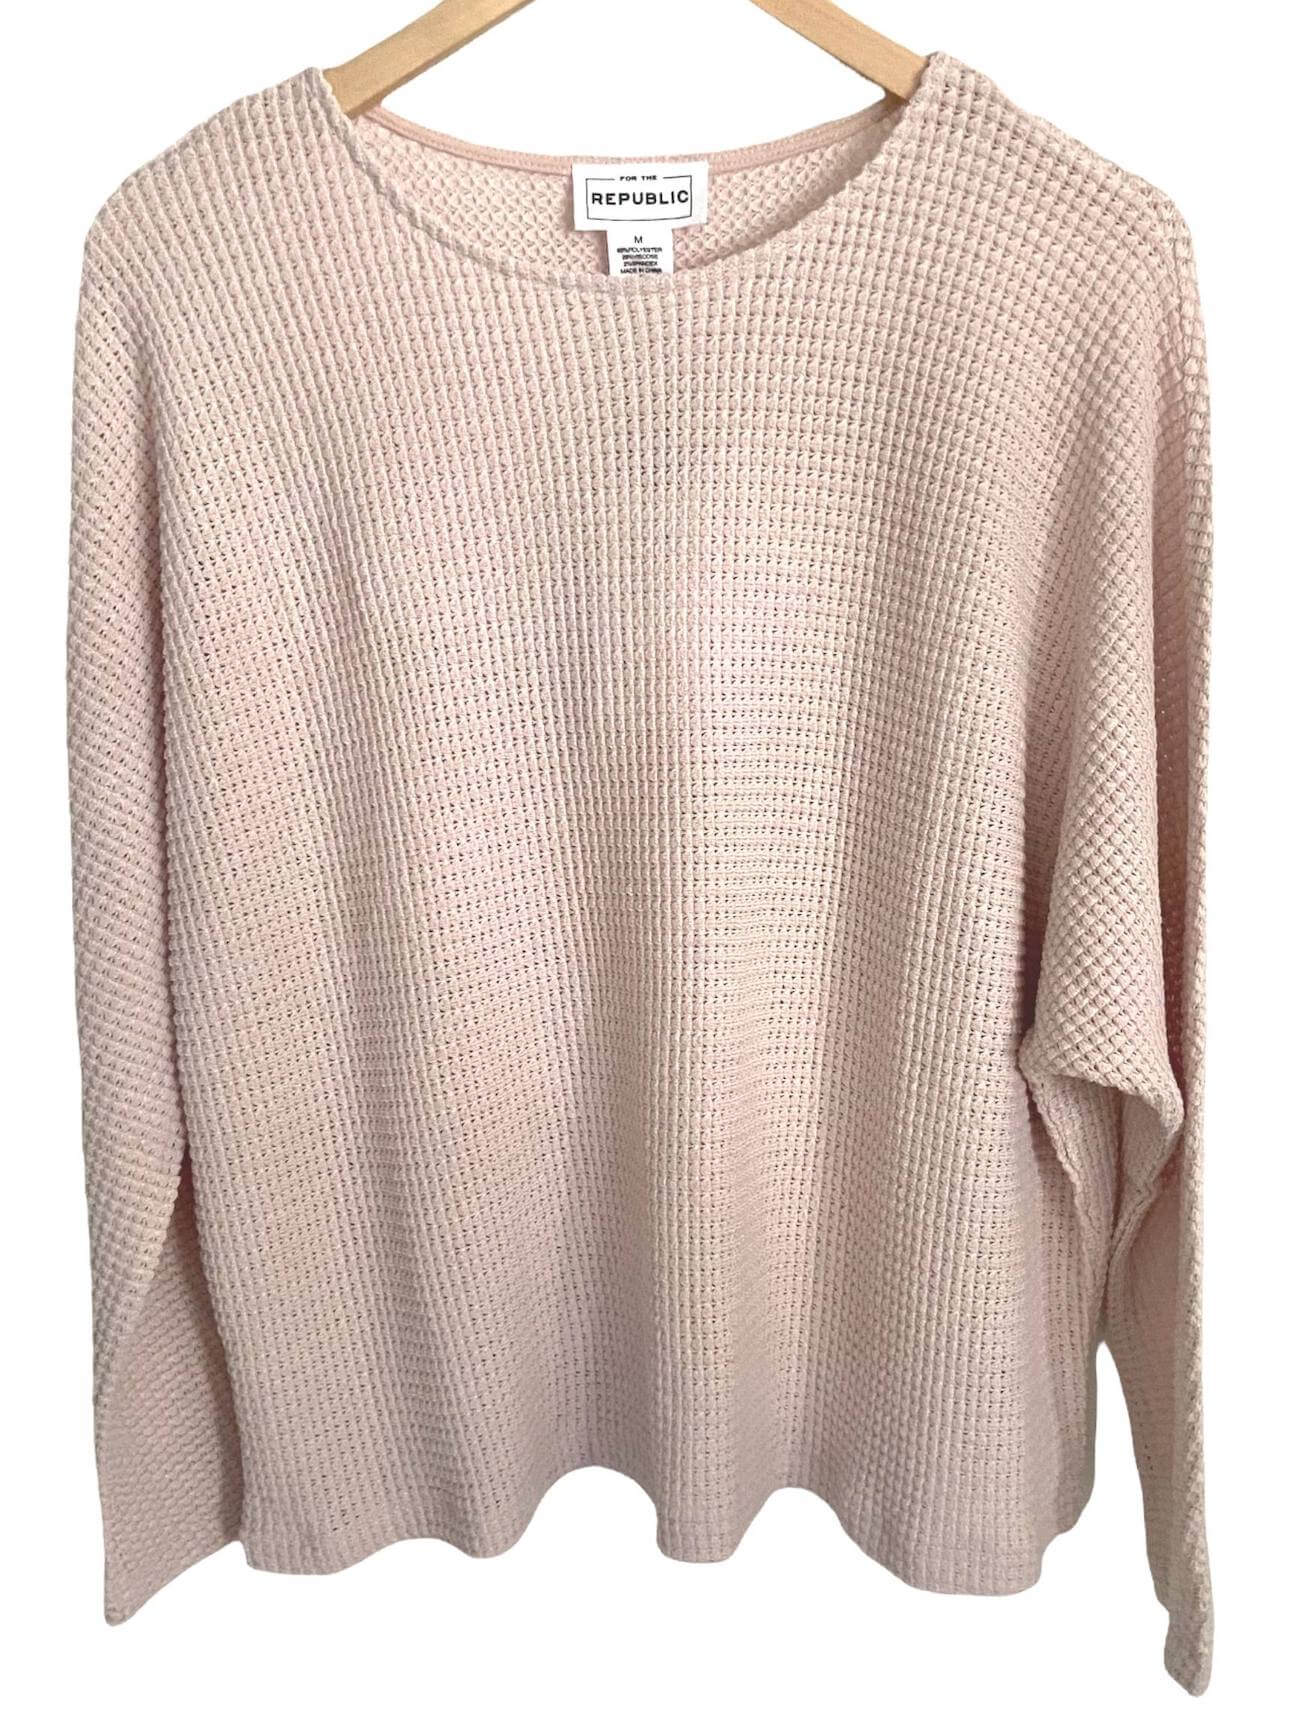 Soft Summer FOR THE REPUBLIC pale pink knit top